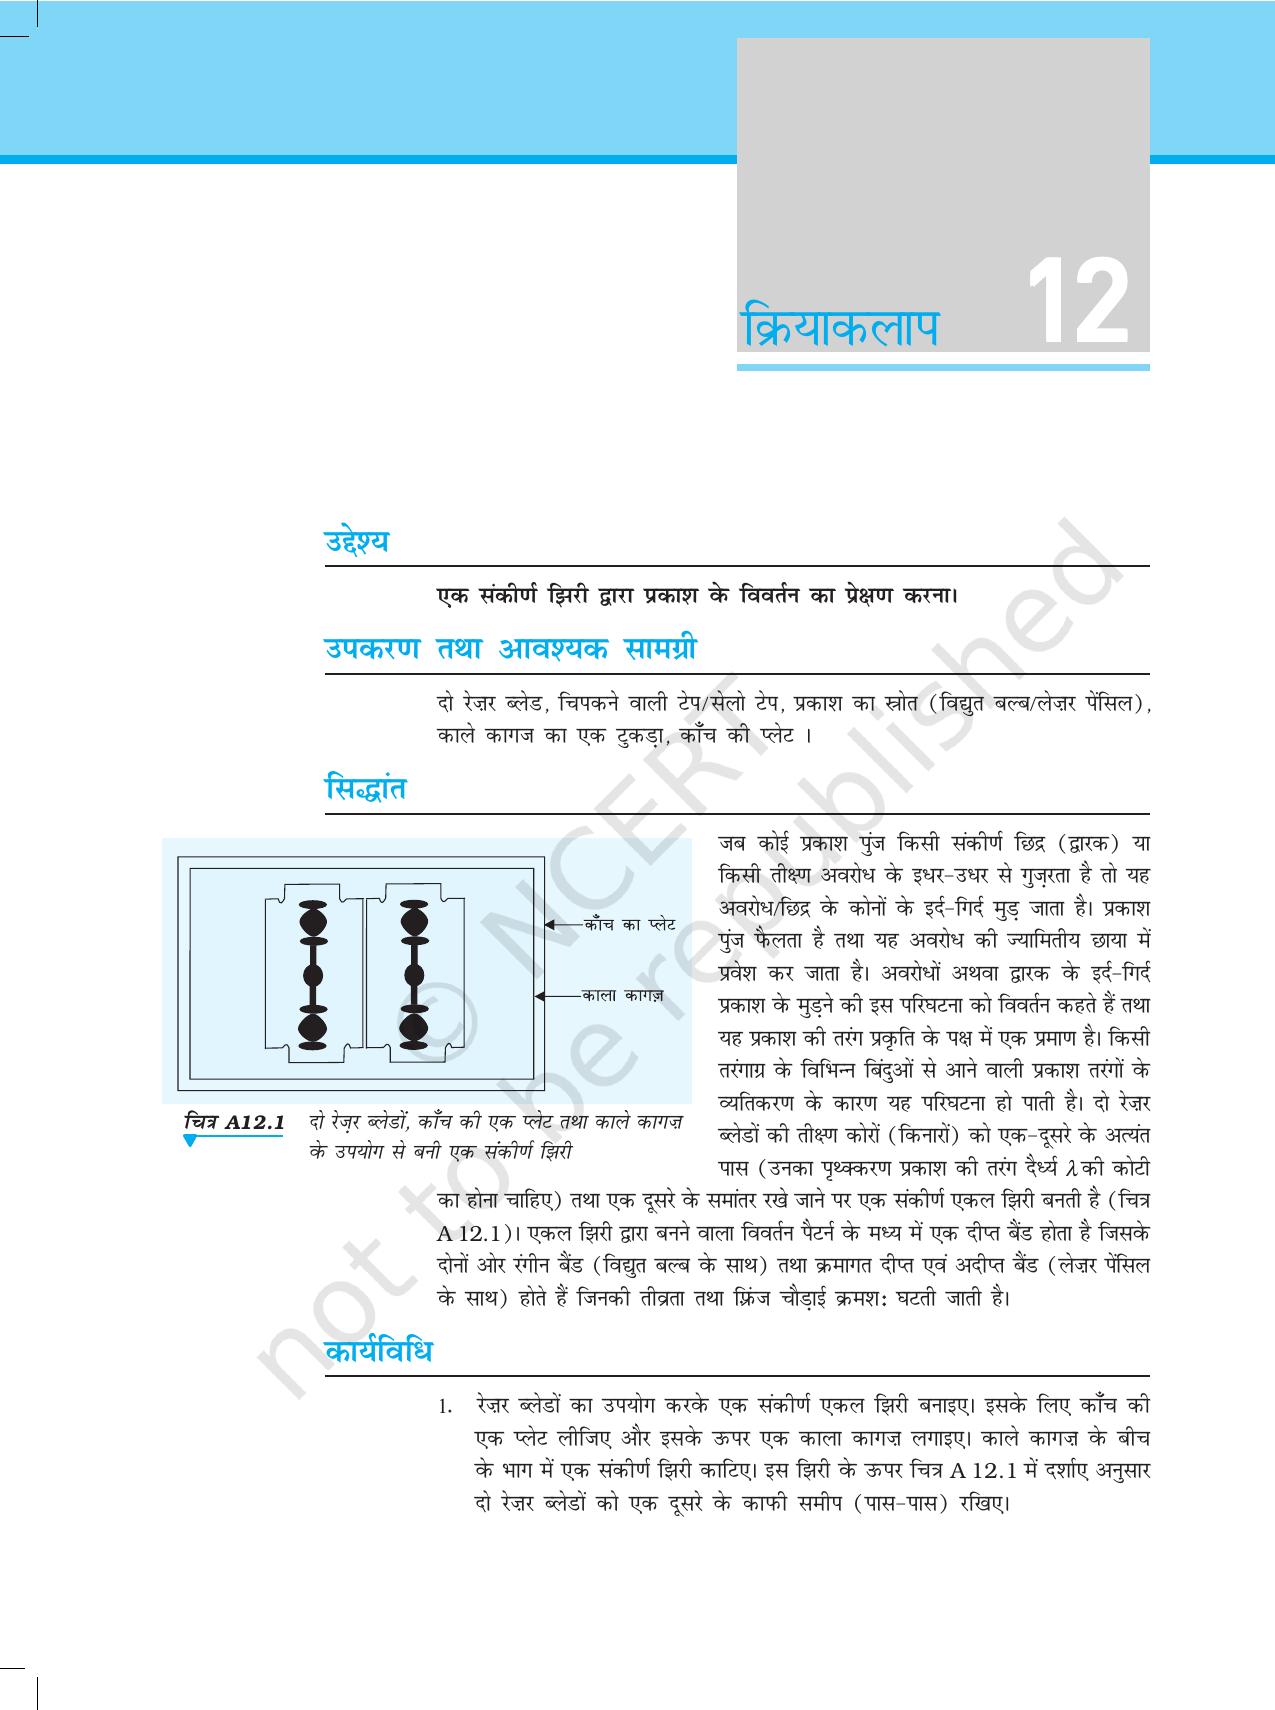 NCERT Laboratory Manuals for Class XII भौतिकी - क्रियाकलाप (12 - 14) - Page 1